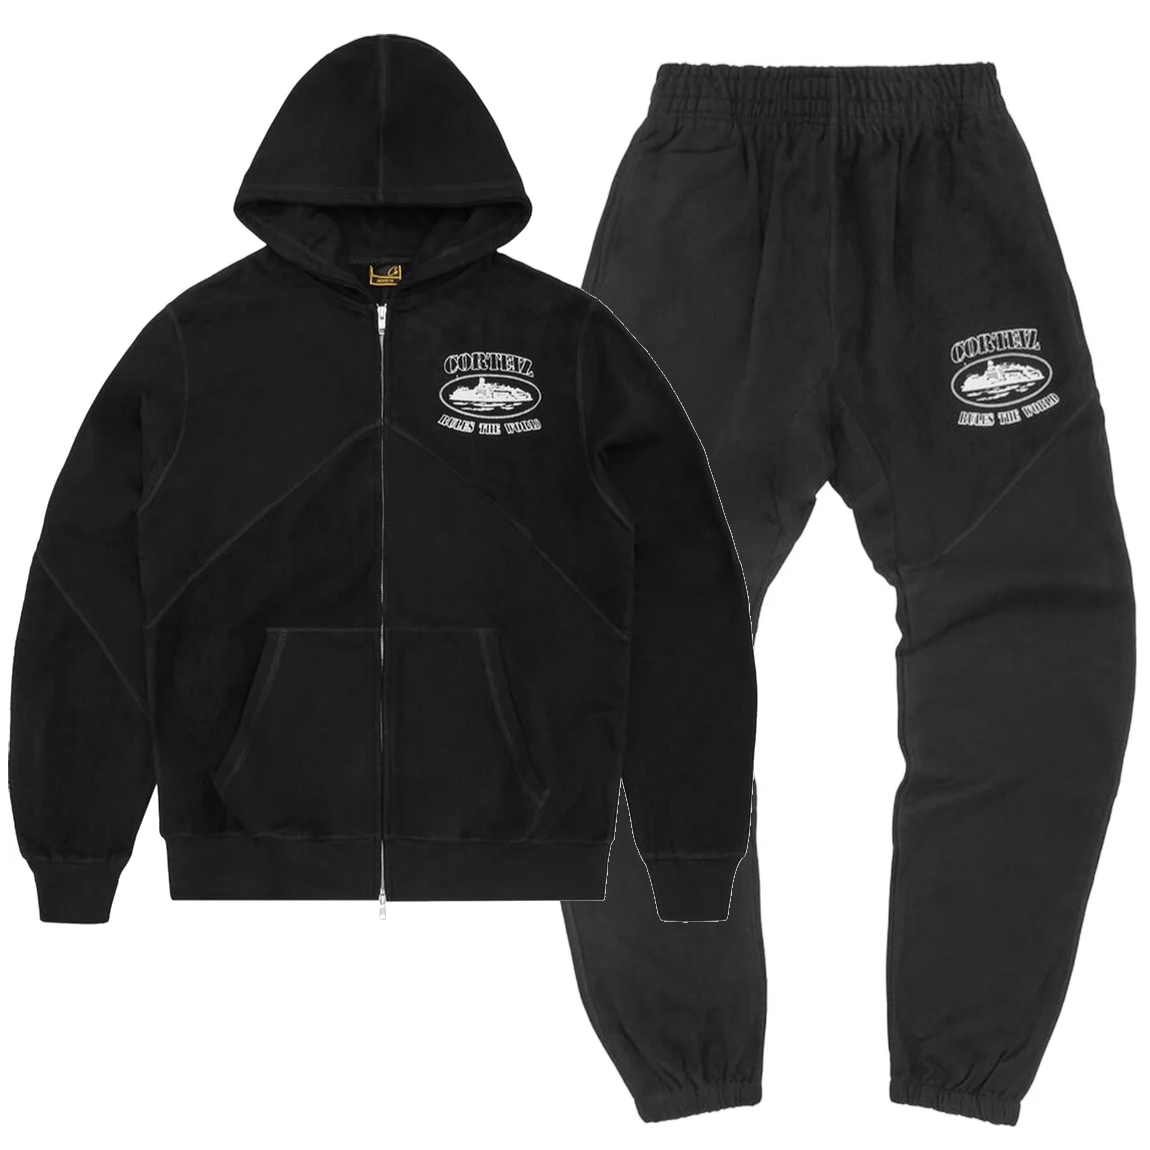 CORTEIZ RULES THE WORLD ZIP UP TRACKSUIT